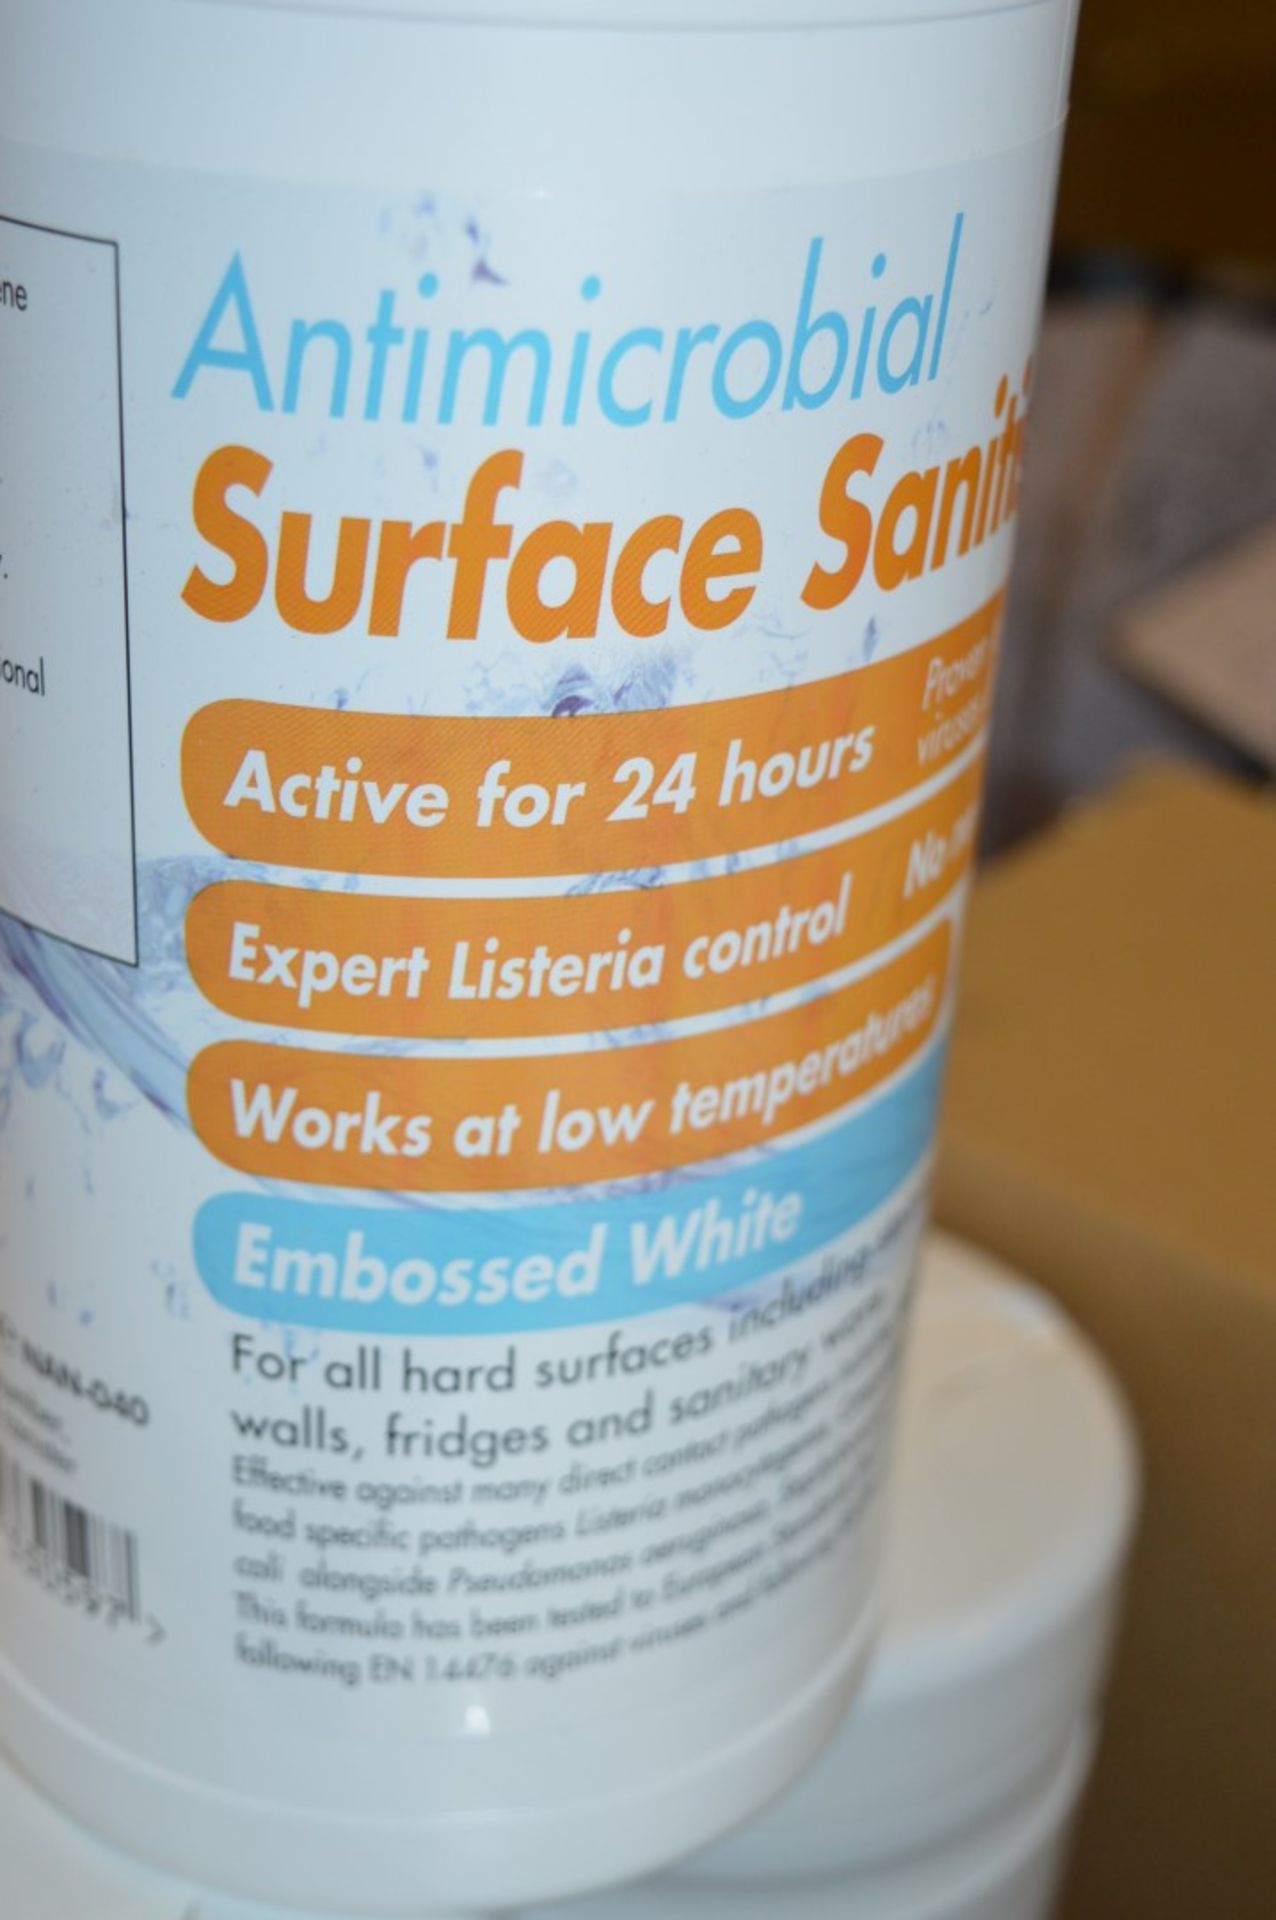 6 x Tubs of Byotrol Antimicrobial Surface Sanitising Wipes - Includes 6 Tubs of 150 Wipes - Kills - Image 3 of 7